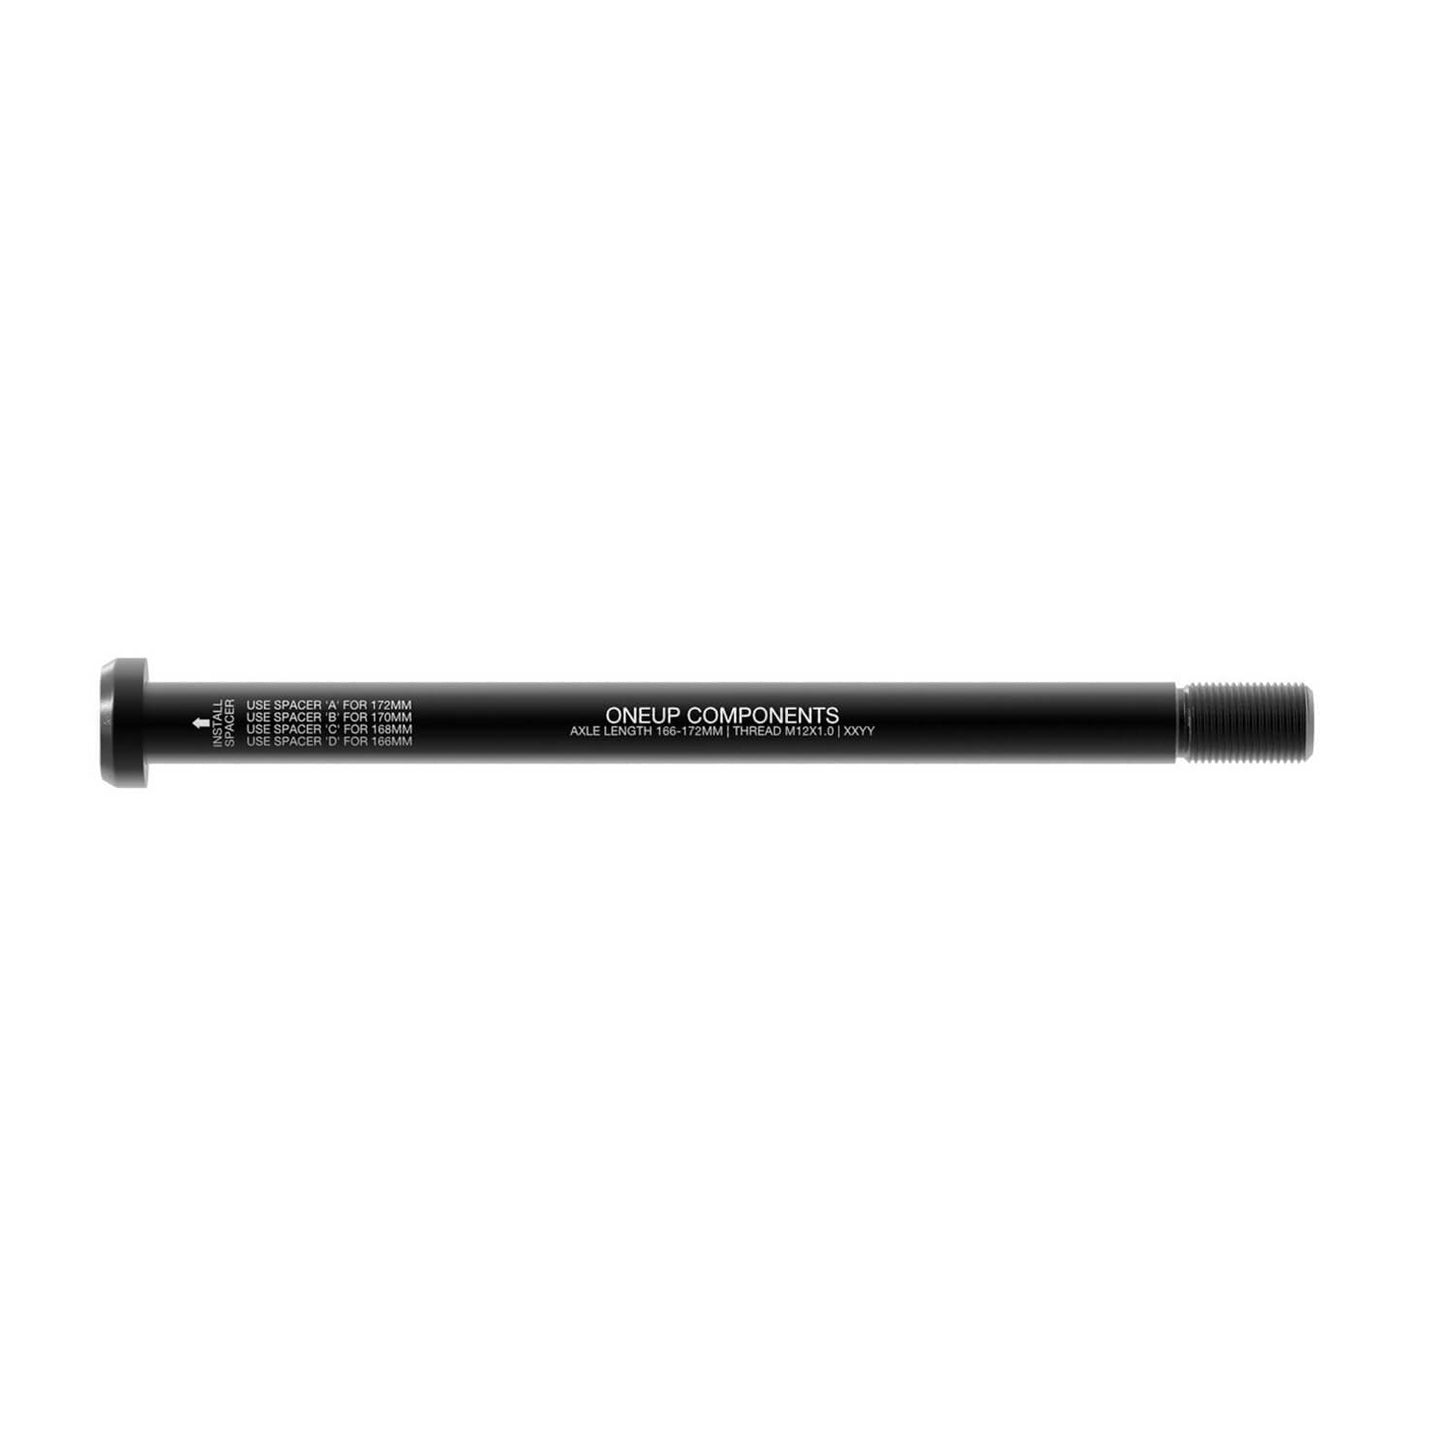 OneUp Components Rear Axle - Black - 166-172mm Axle Length - M12 x 1mm Thread Pitch